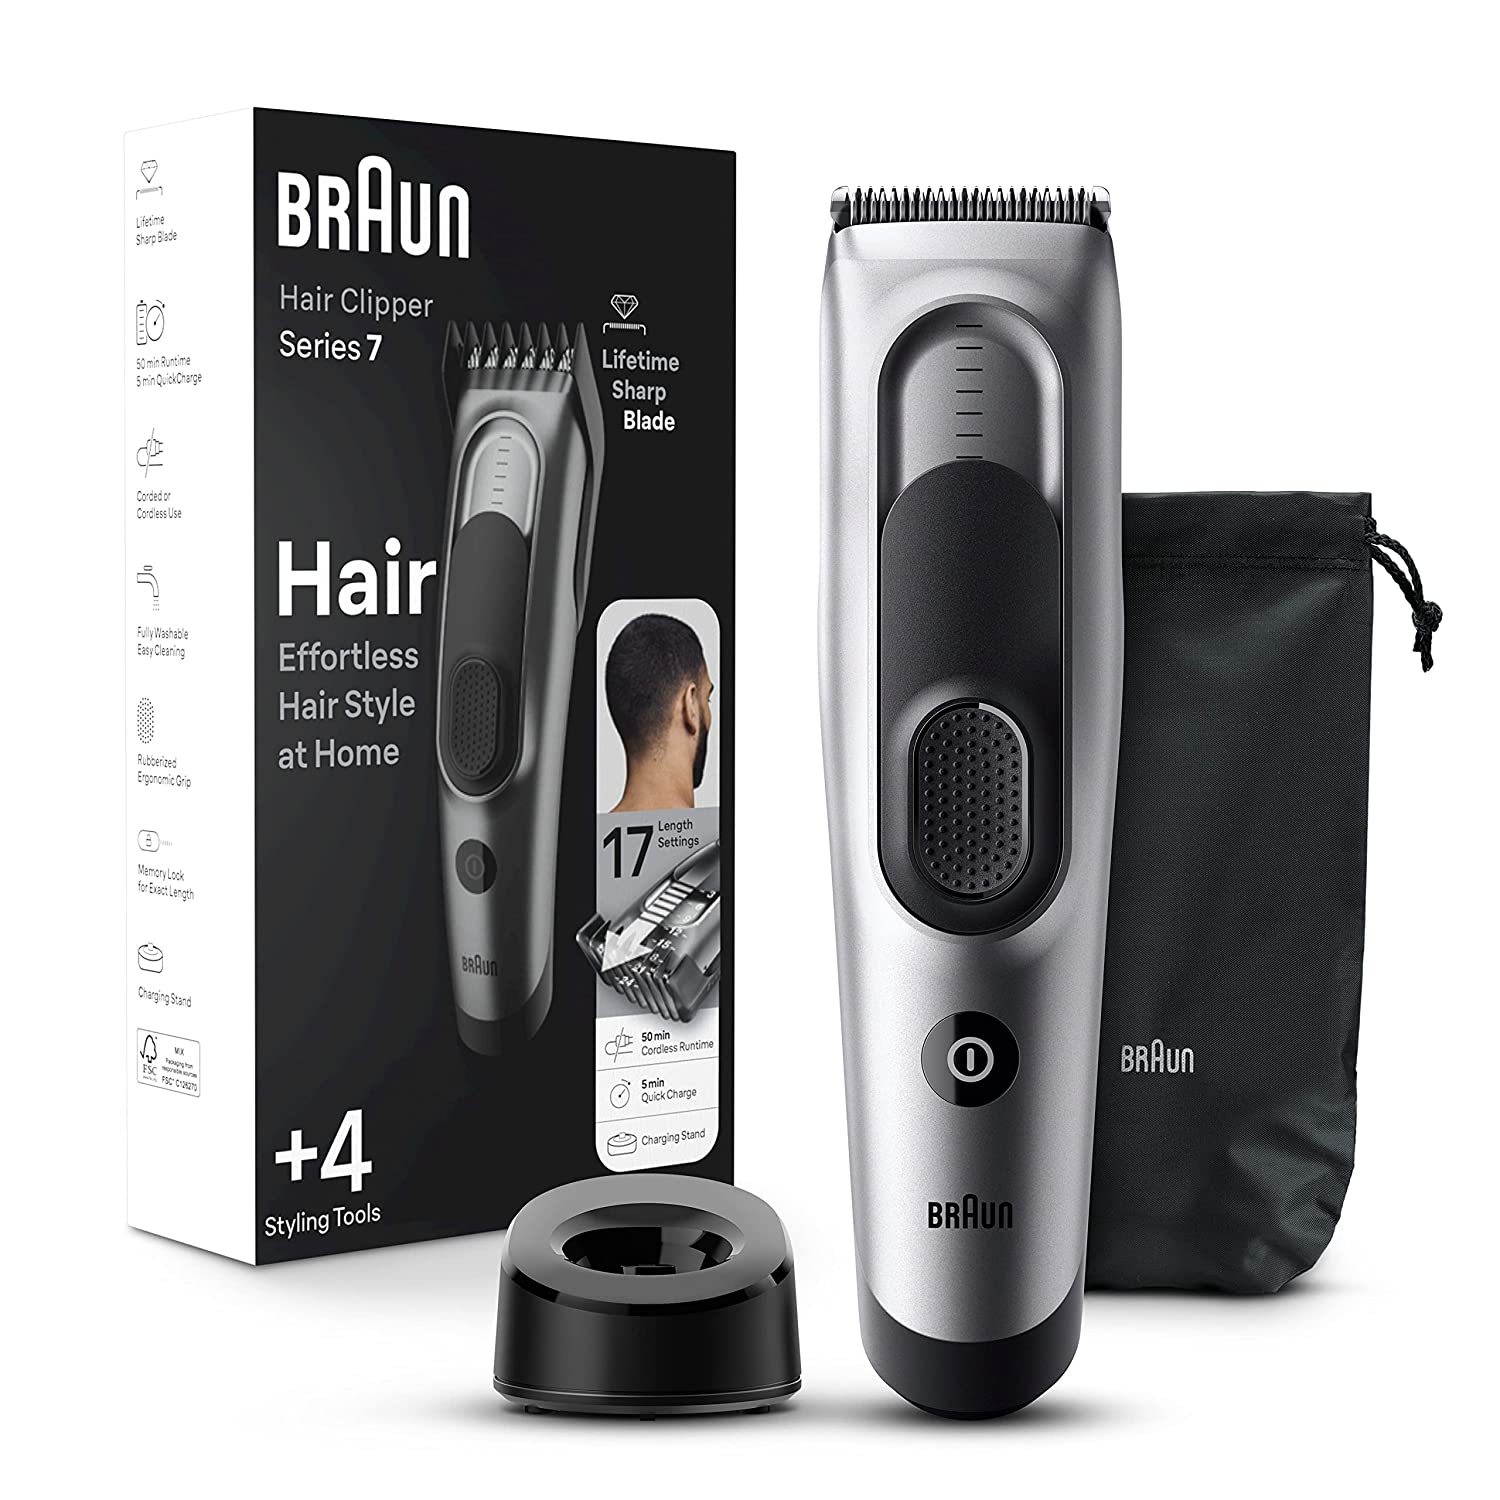 Men'S Hair Clippers For Home Use With 17 Length Settings, Memory Safetylock - $90.97